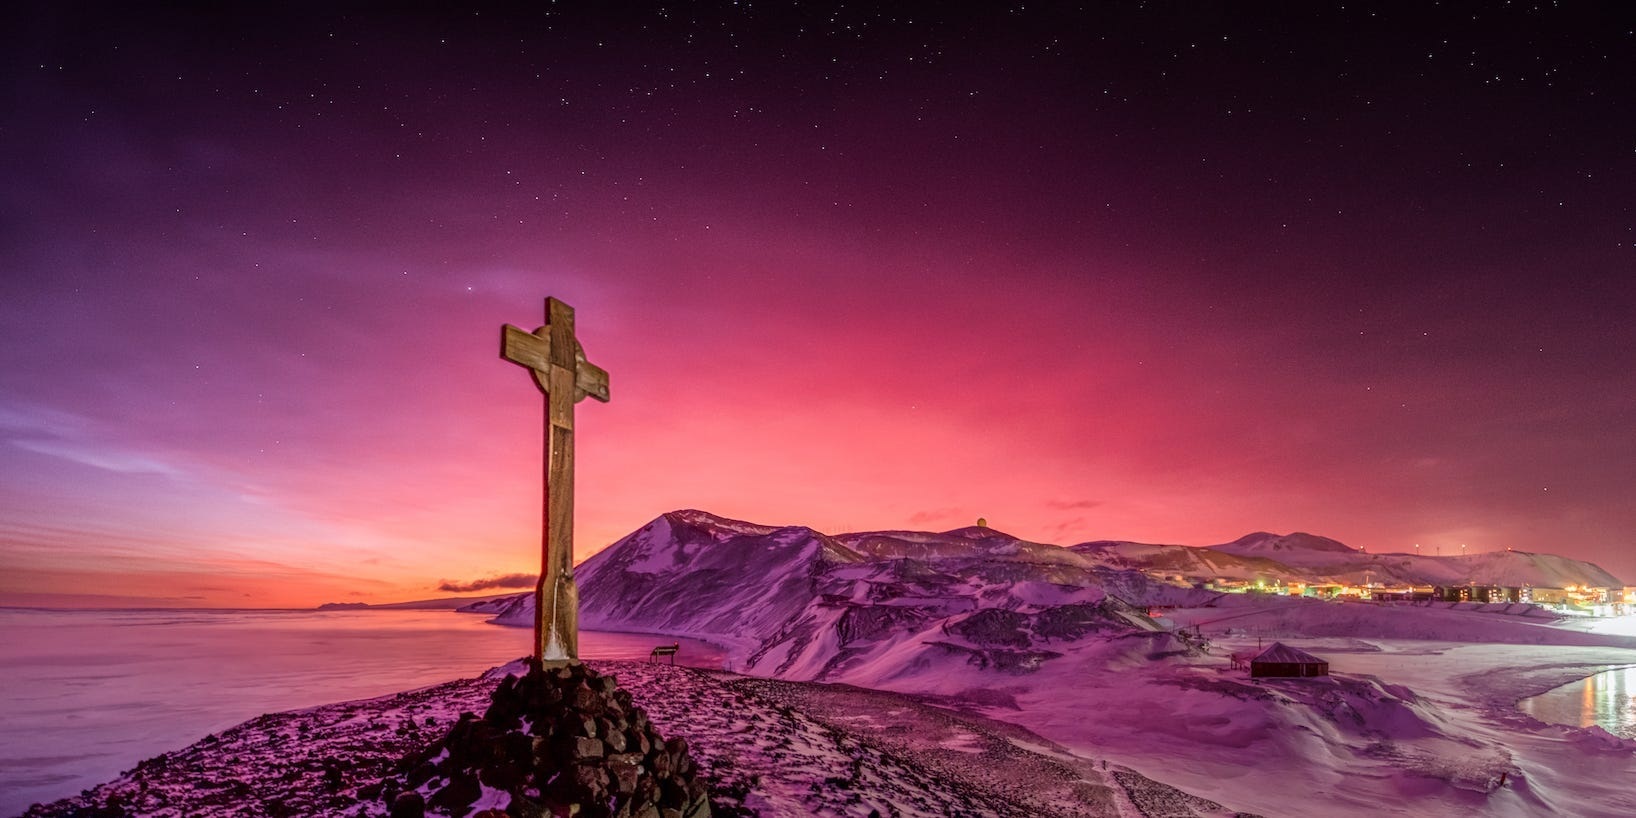 The picture shows Vince's cross on Hut point, erected in remembrance of George Vince, the first person known to have died in Antarctica. Stuart Shaw/Fly on the Wall Images